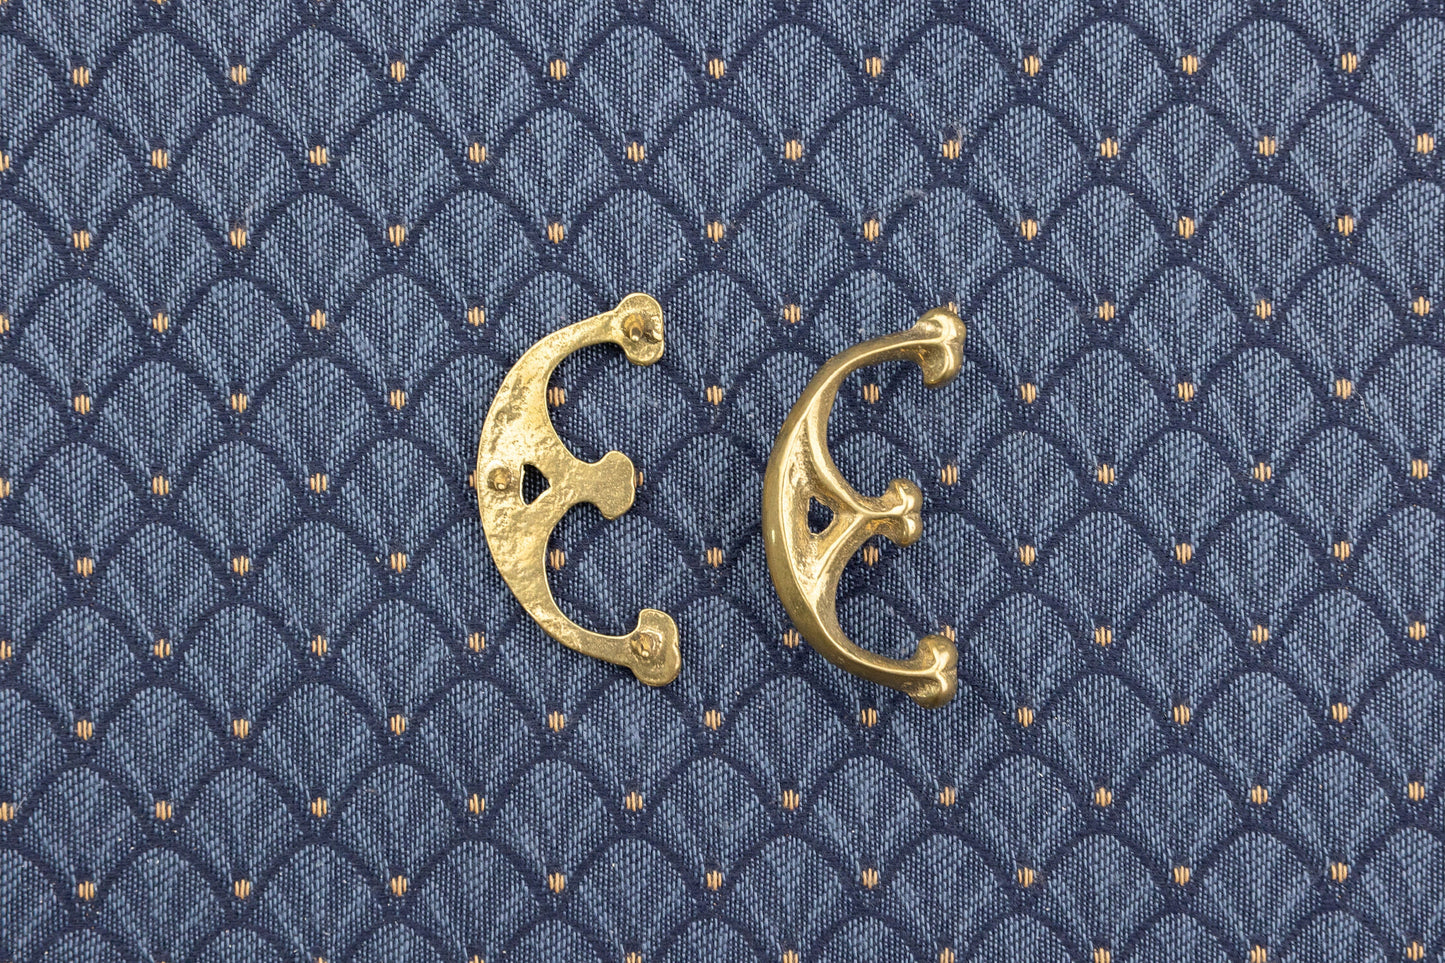 Purse fittings - small (set of two)